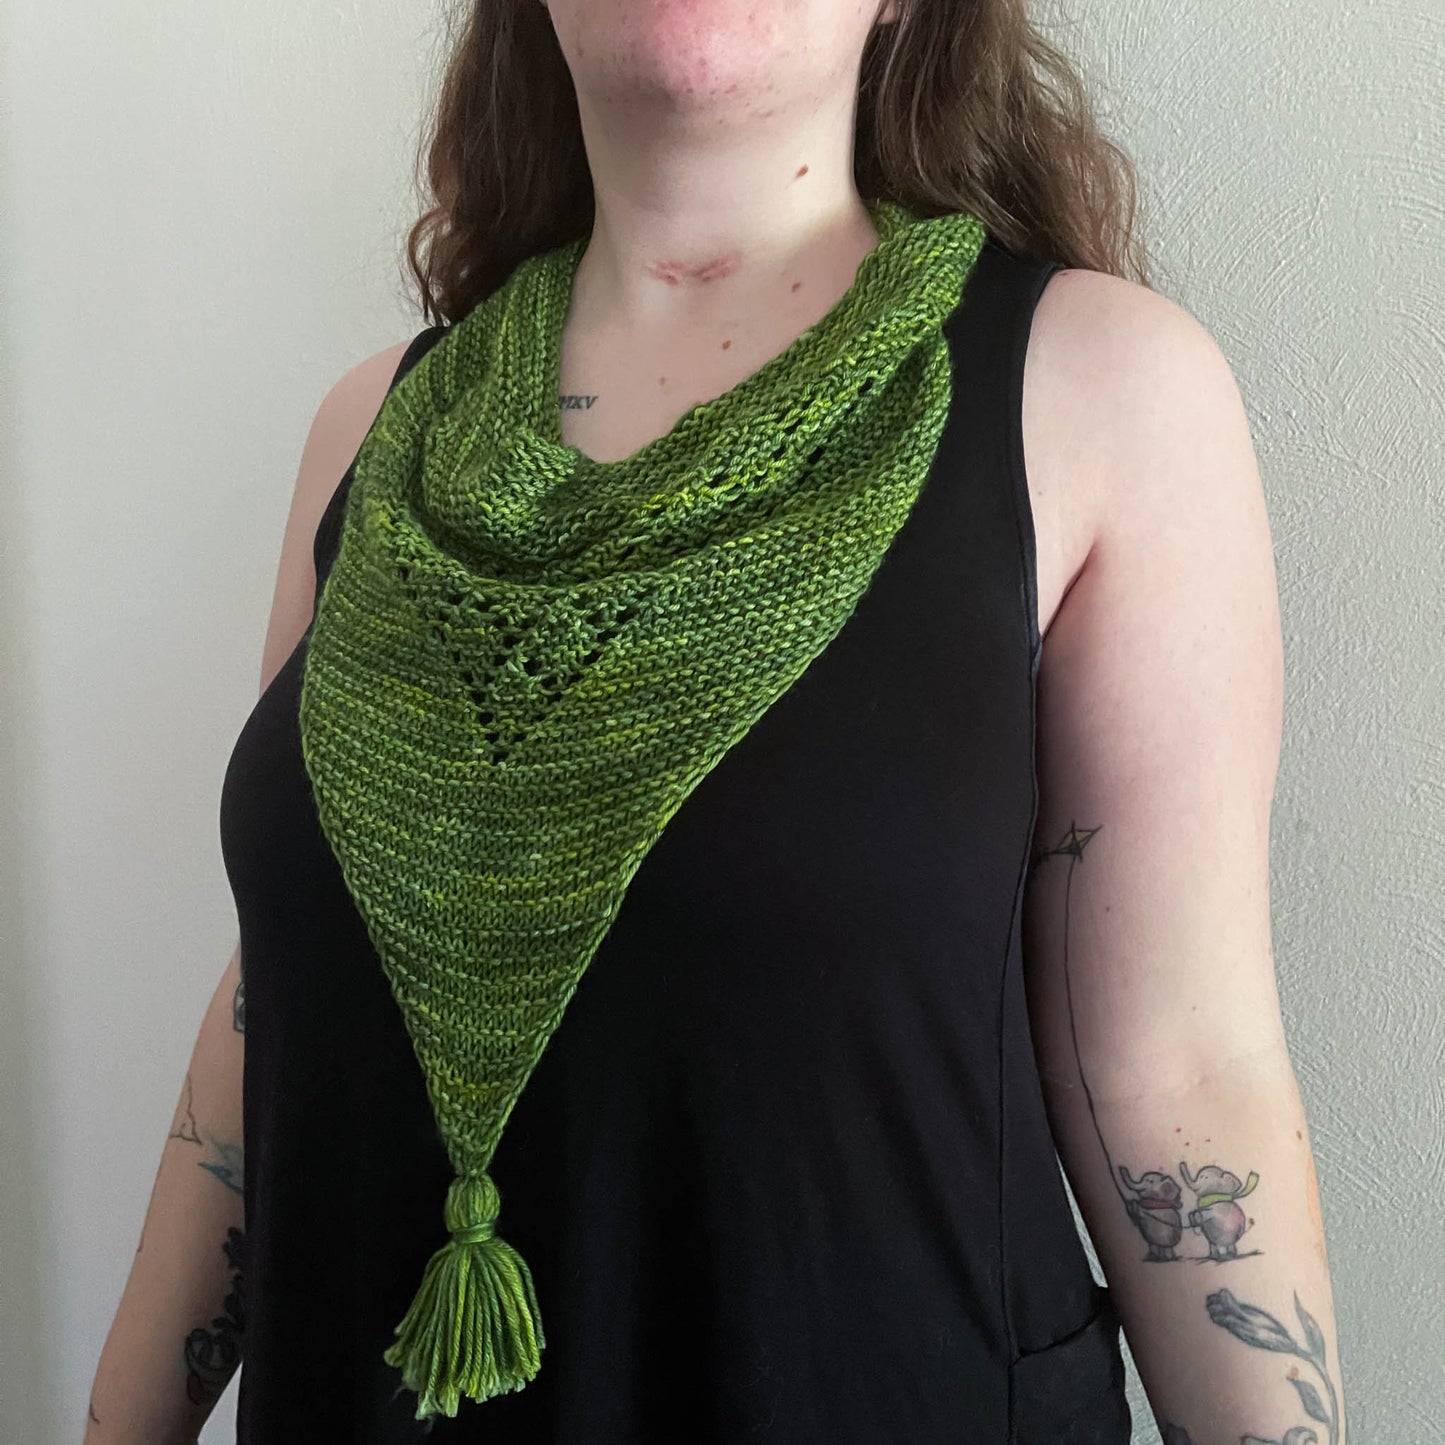 A white woman with tattoos wears a bright green knit bandana cowl with lace details and a pom-pom.